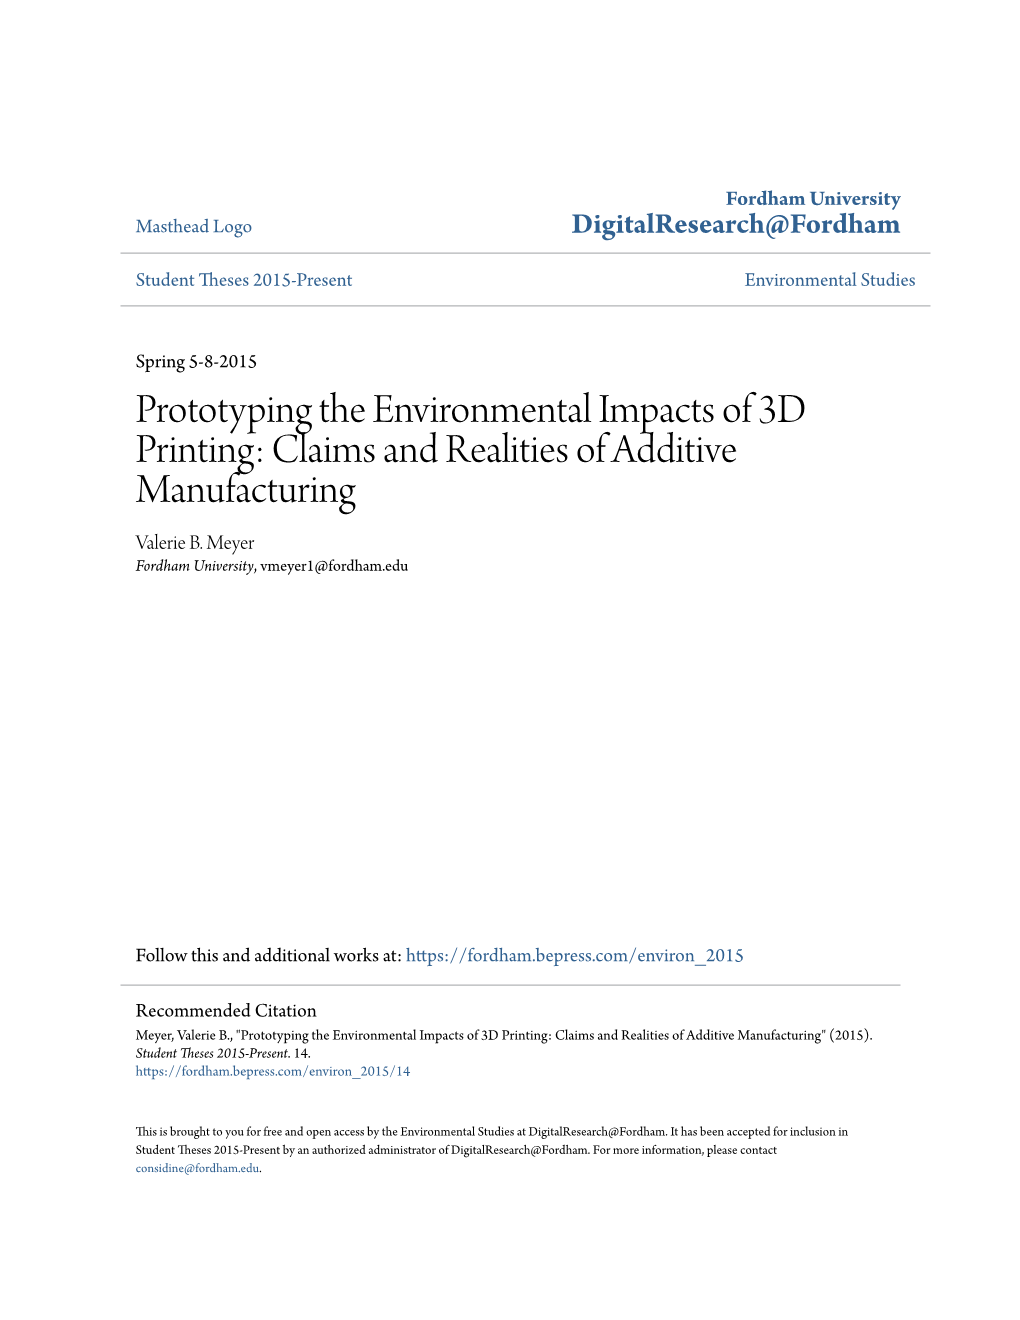 Prototyping the Environmental Impacts of 3D Printing: Claims and Realities of Additive Manufacturing Valerie B